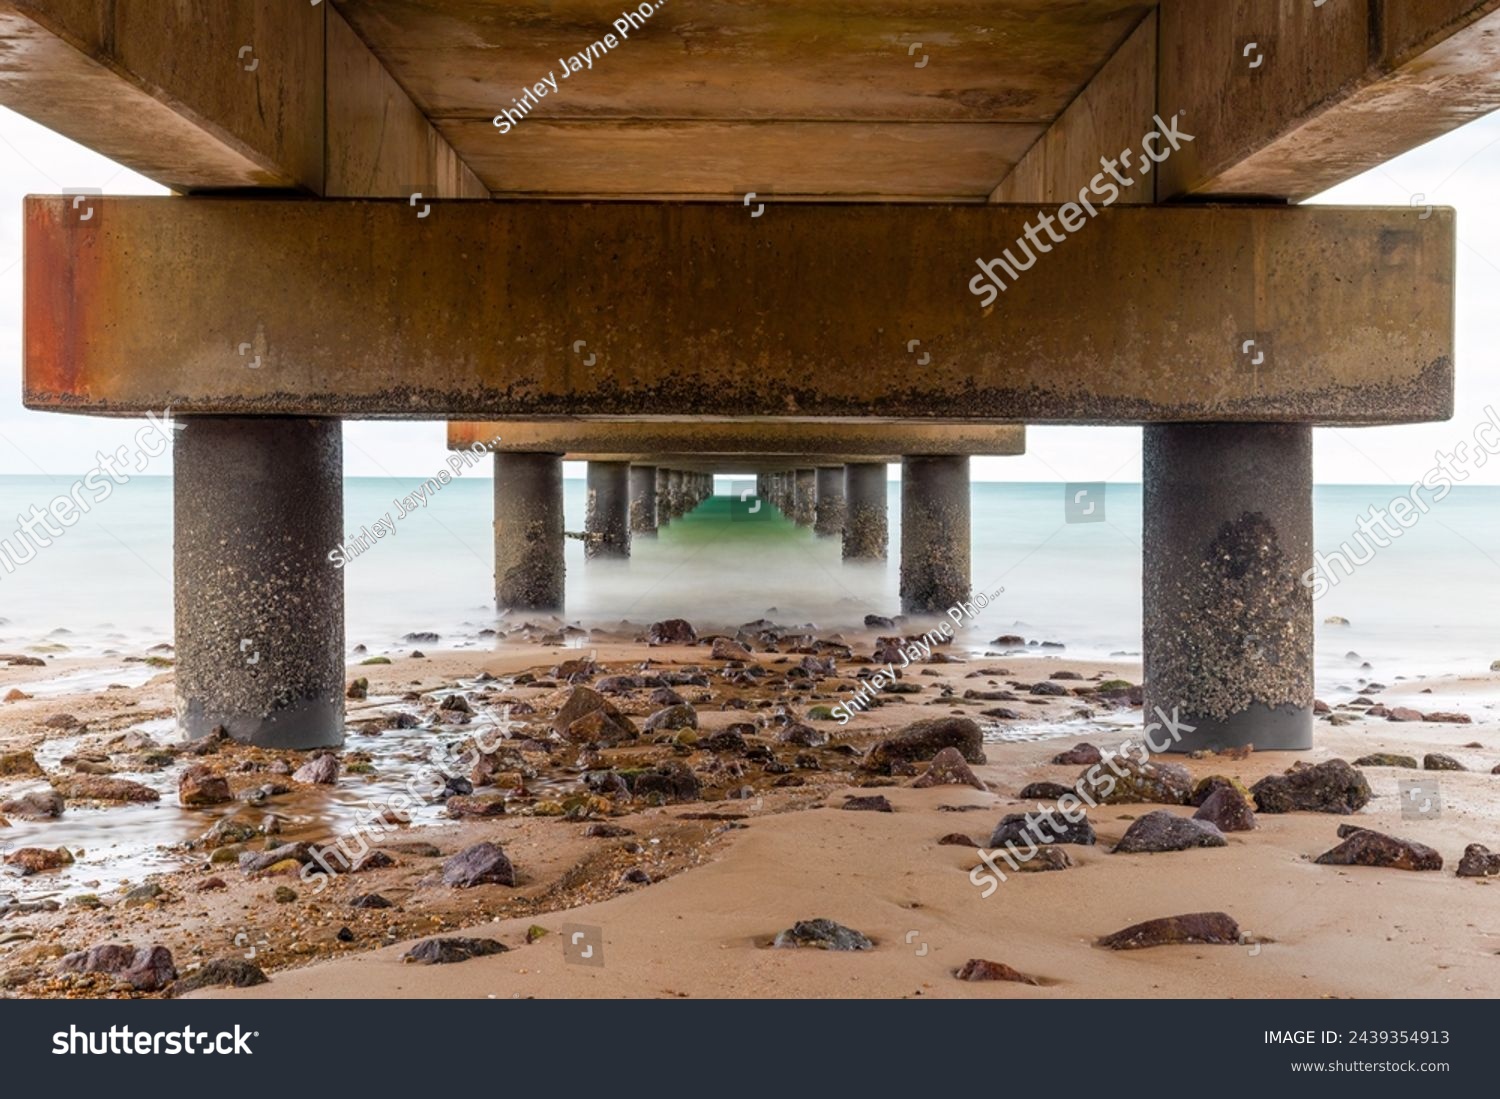 The underneath of a fishing jetty in diminishing perspective view in long exposure showing sand, rocks and support pillars on a tropical beach in Mission Beach in Queensland, Australia. #2439354913